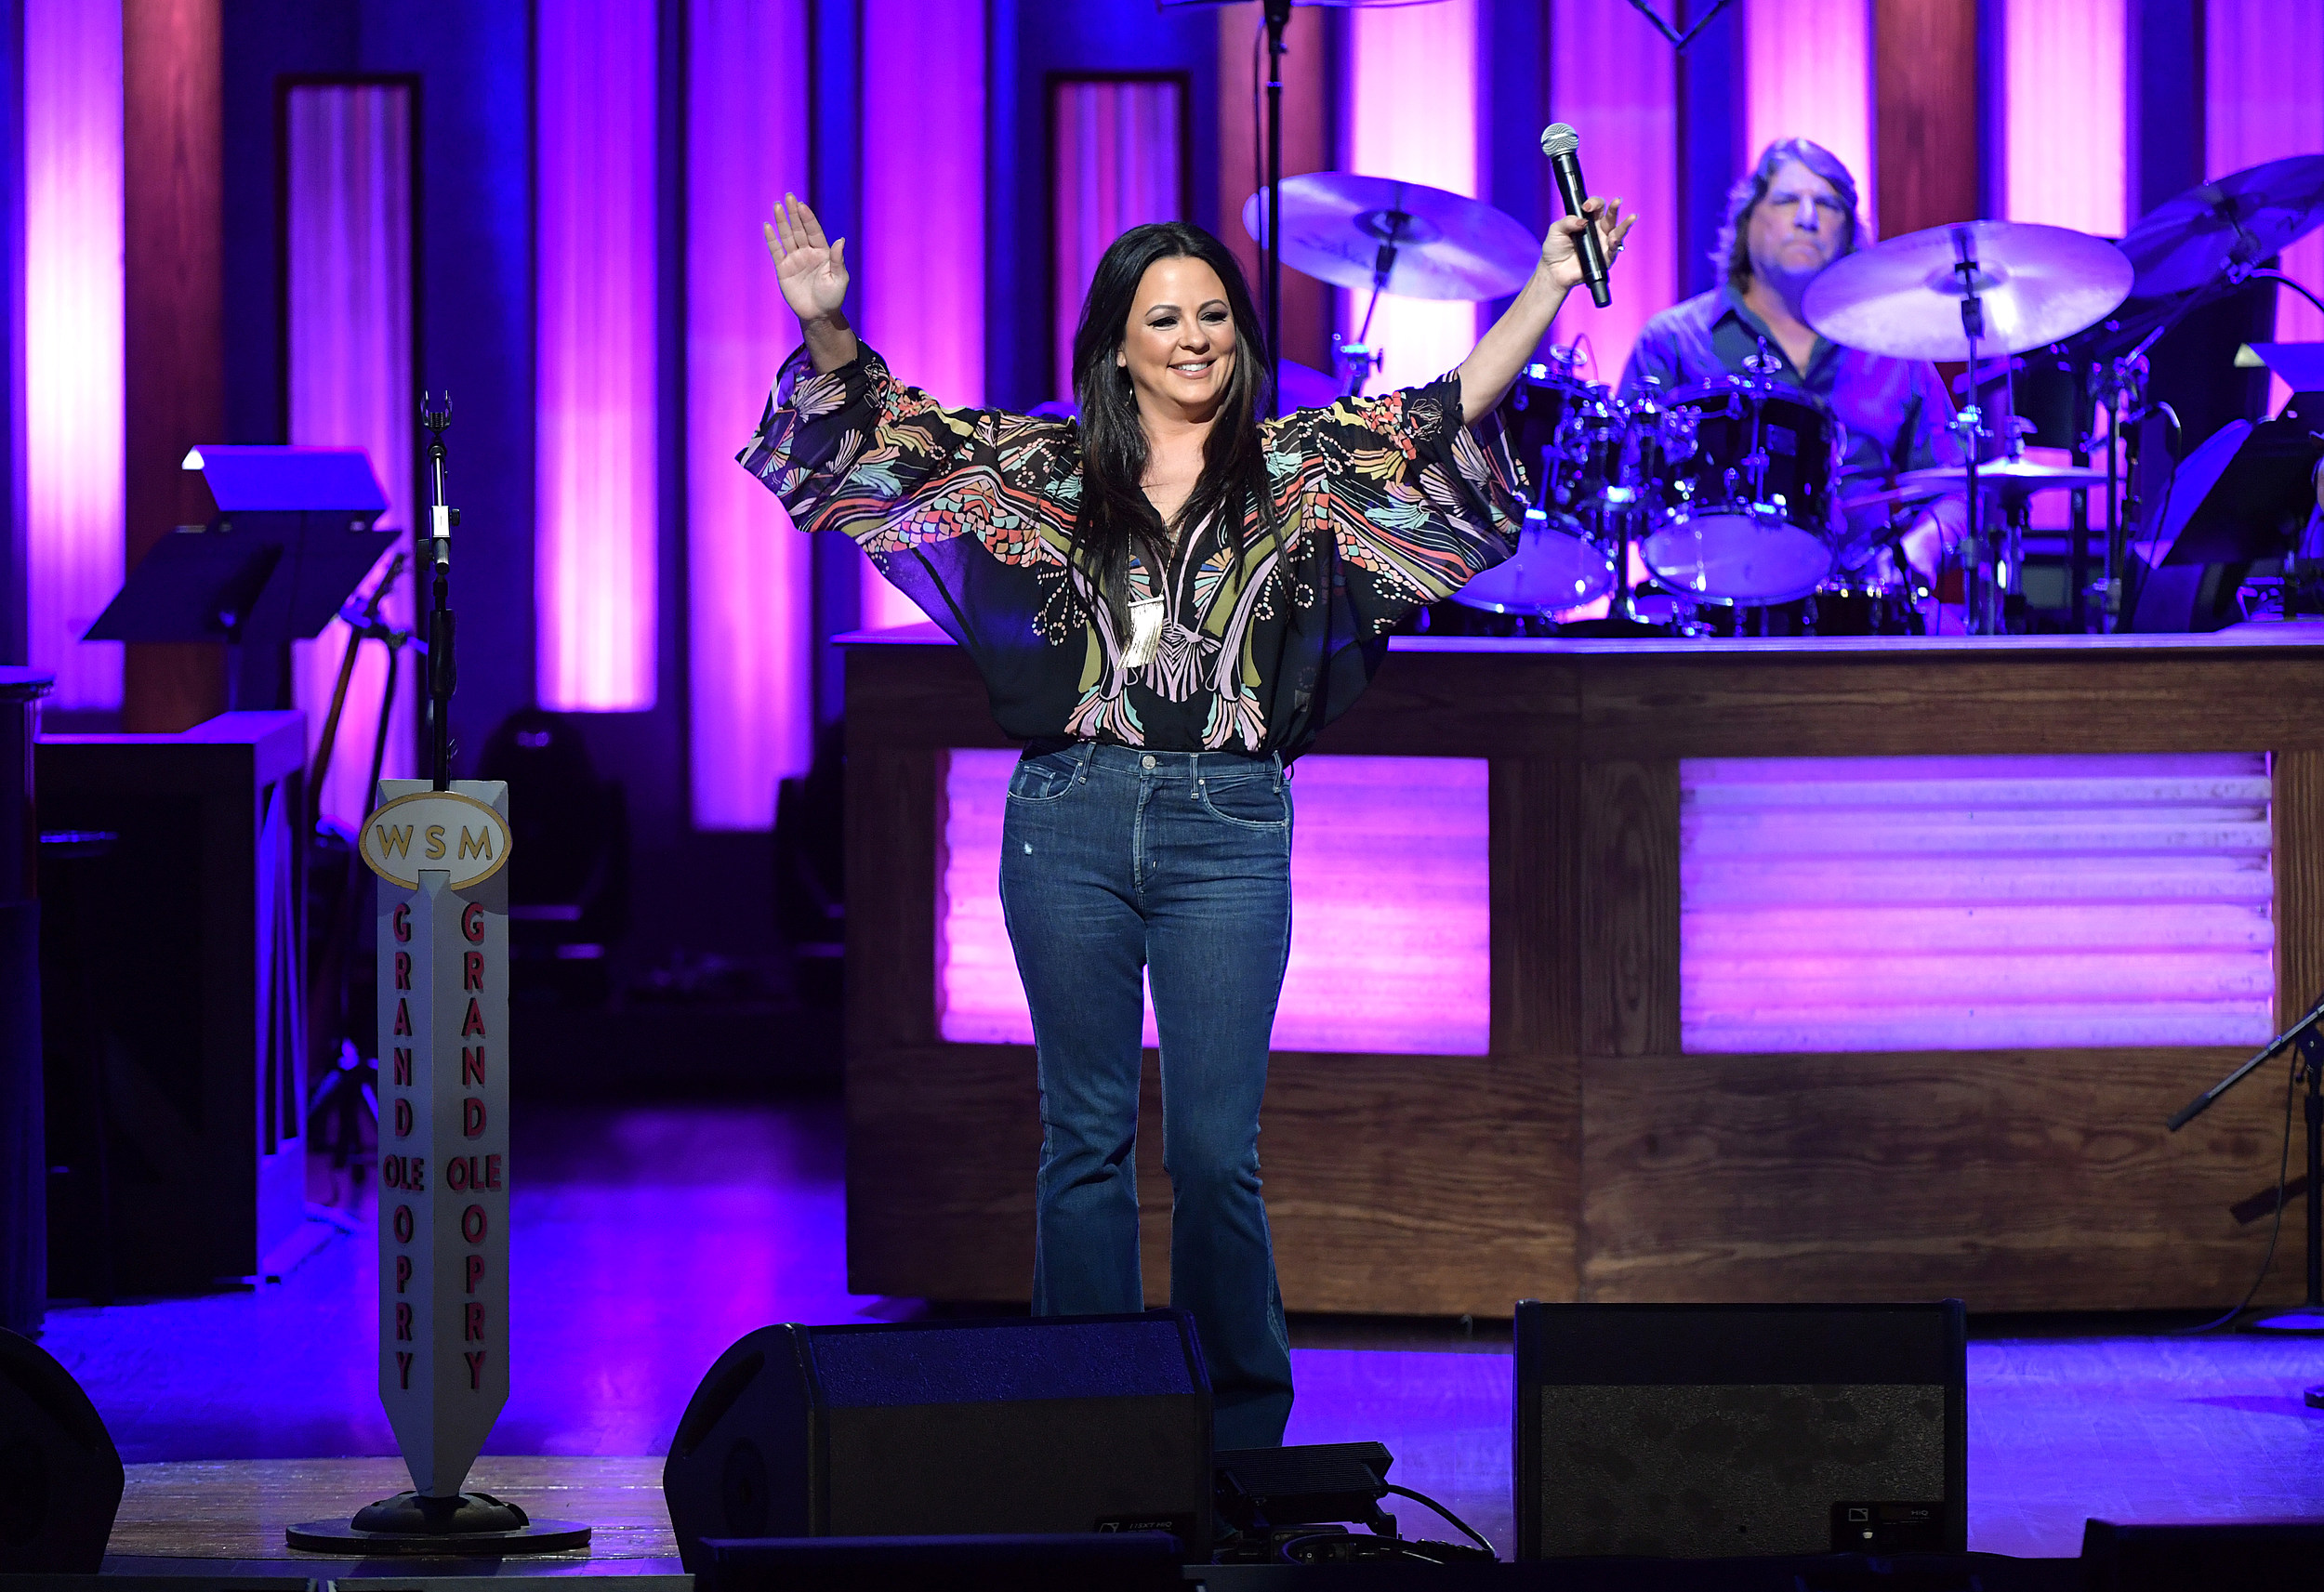 Sara Evans To Release New Album Titled “Slow Me Down”